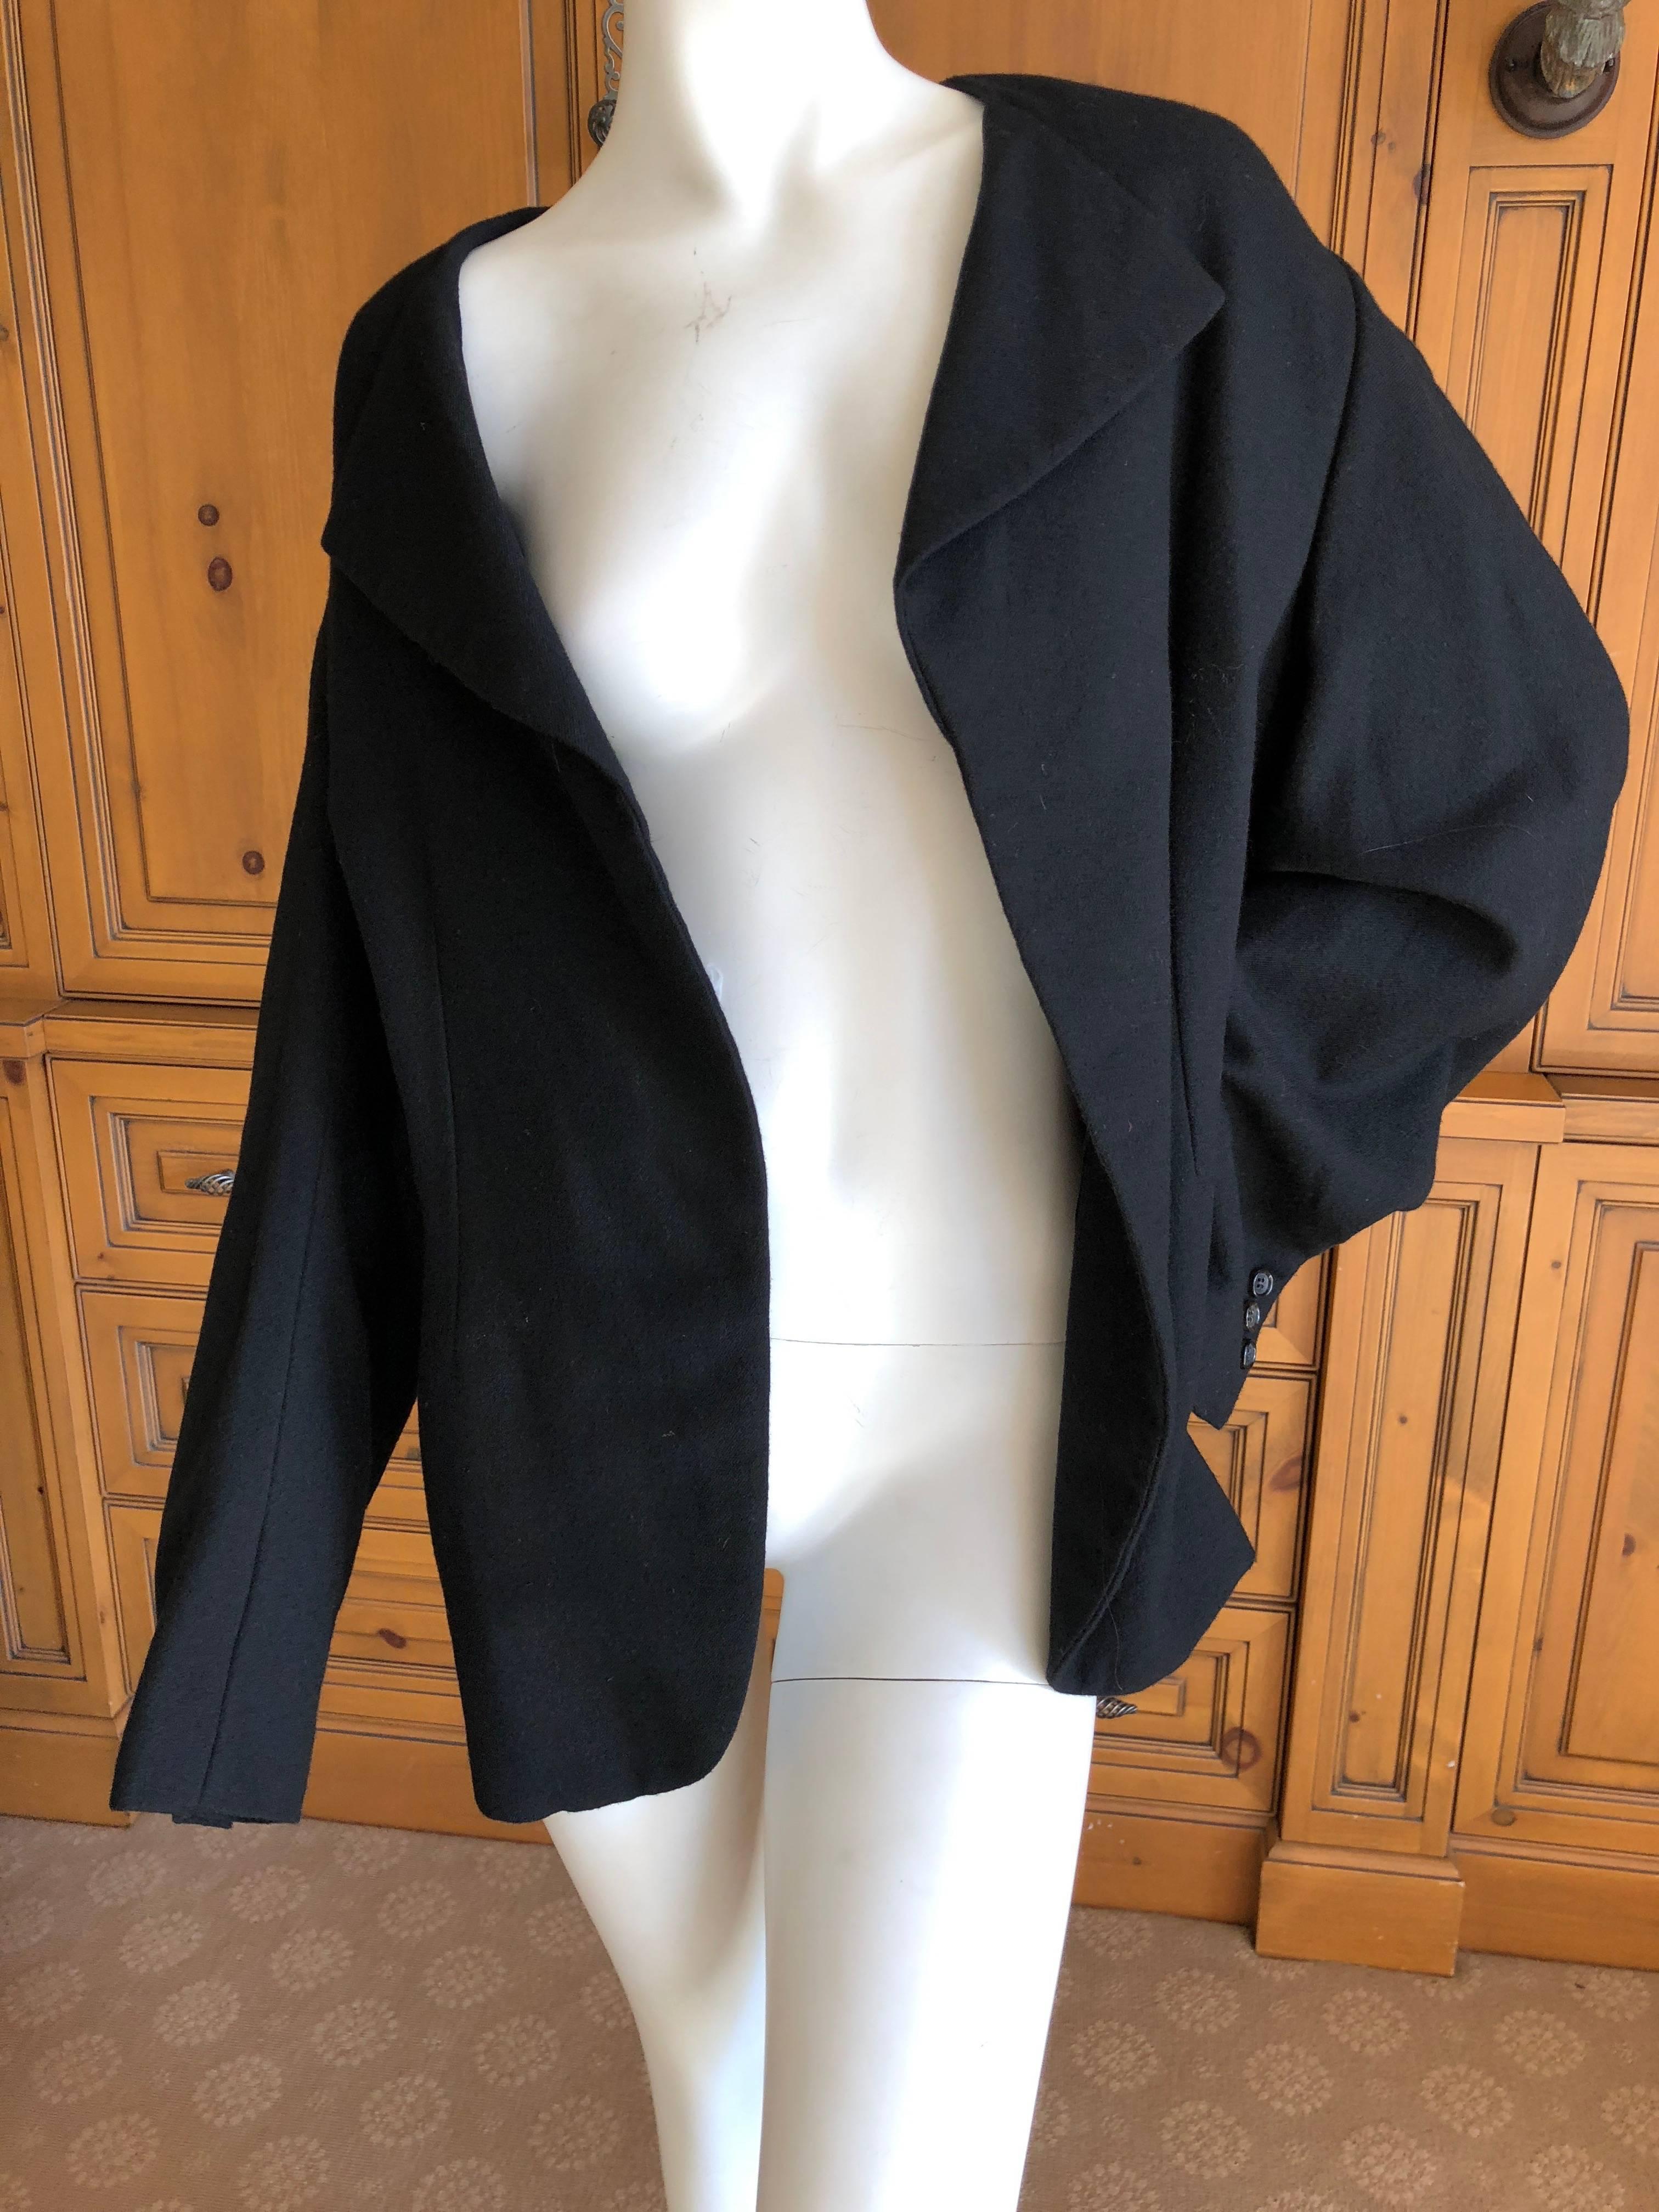 Comme des Garcons 1996 Black Asymmetrical Jacket with Draped Back.
This is a very unusual jacket in that the front is totally asymmetrical .
The right shoulder is fitted so that the lapel is far to the right, hard to photograph or describe .
Dated